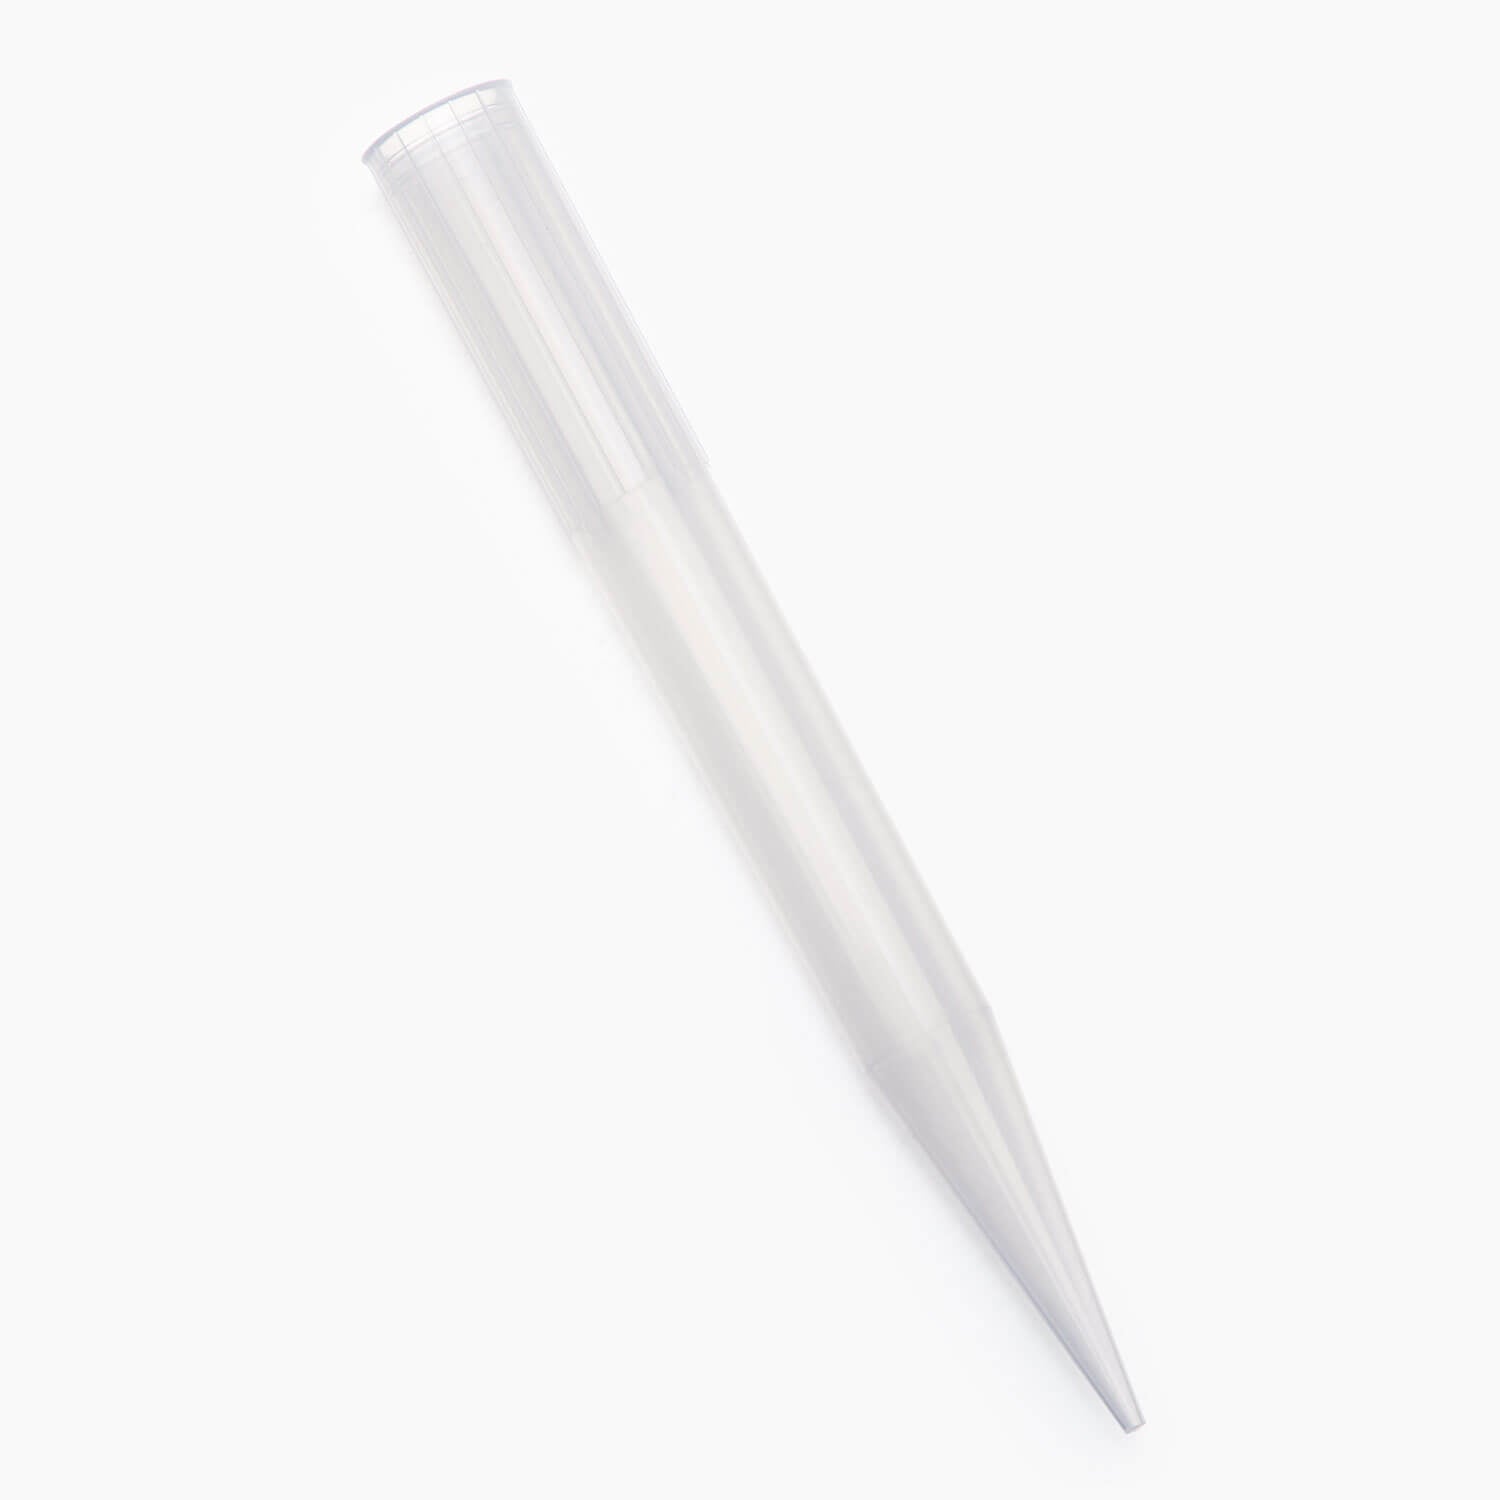 whole 5ml pipette tips fluiend04 for liquid handling